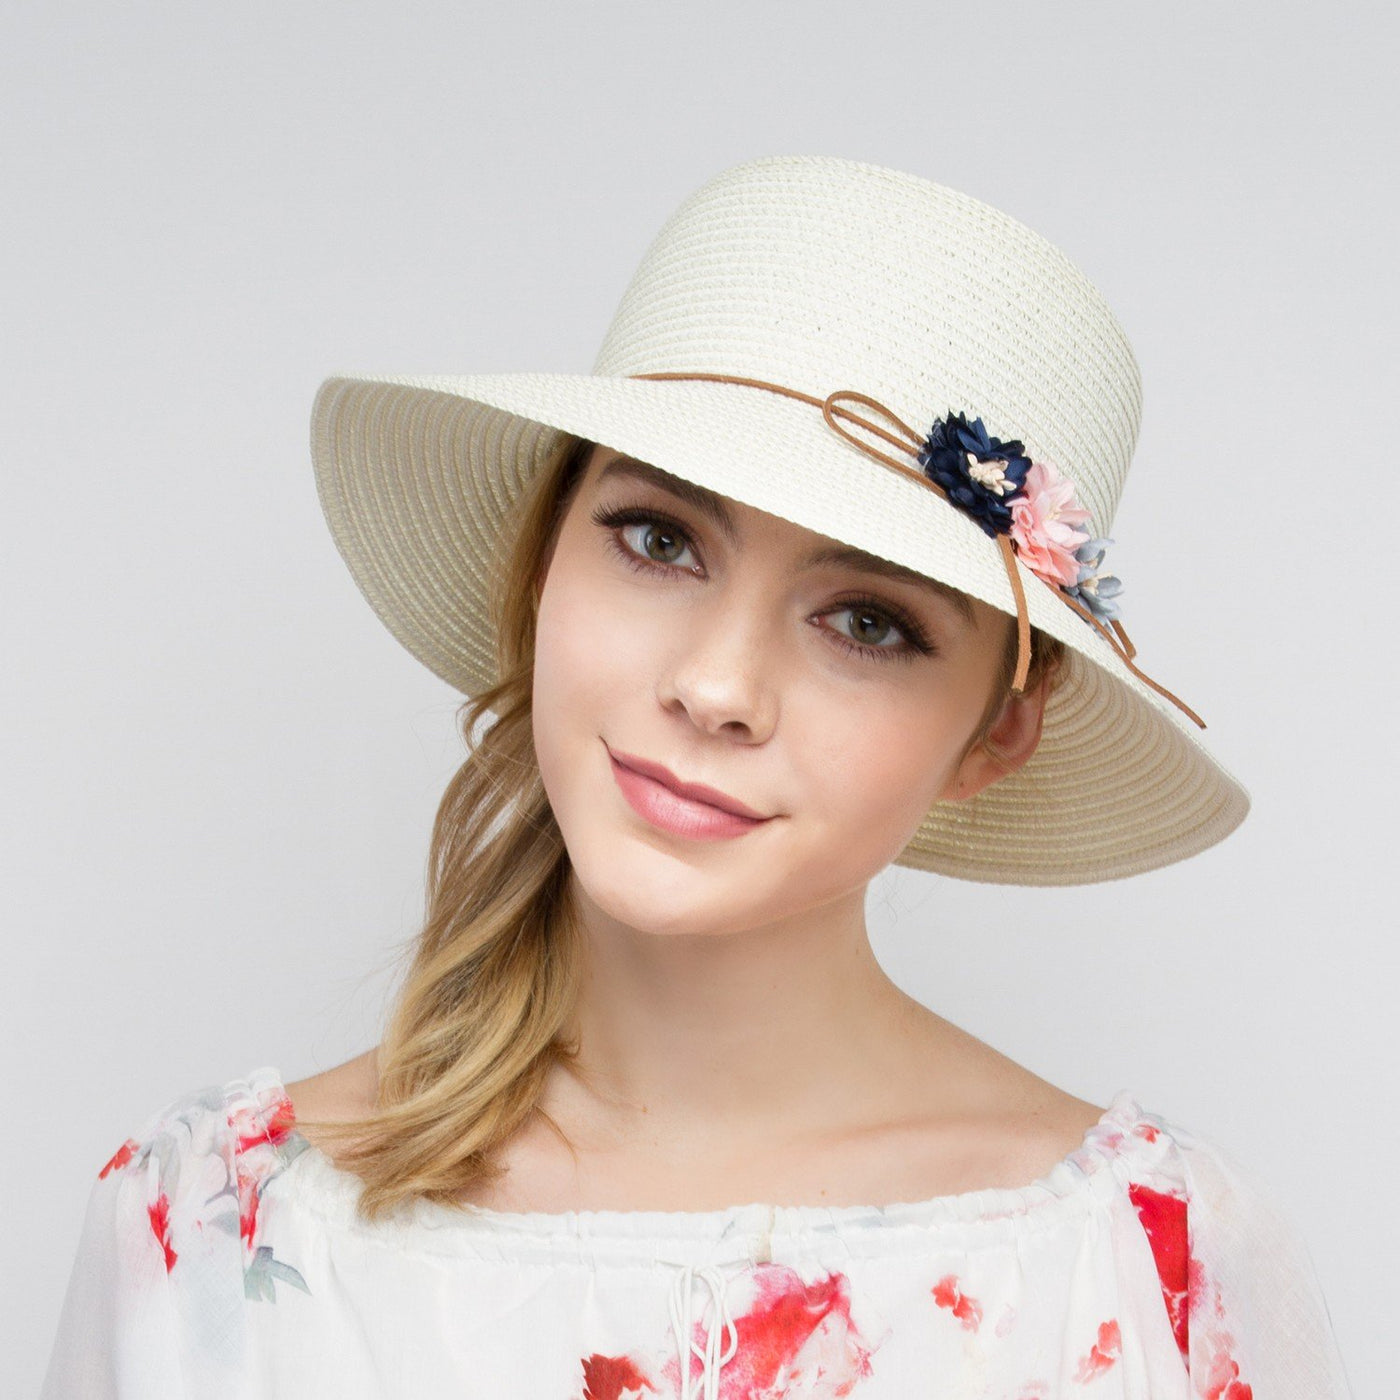 Vintage Inspired Paper Braid Rounded Sun Hat in Ivory - SOLD OUT